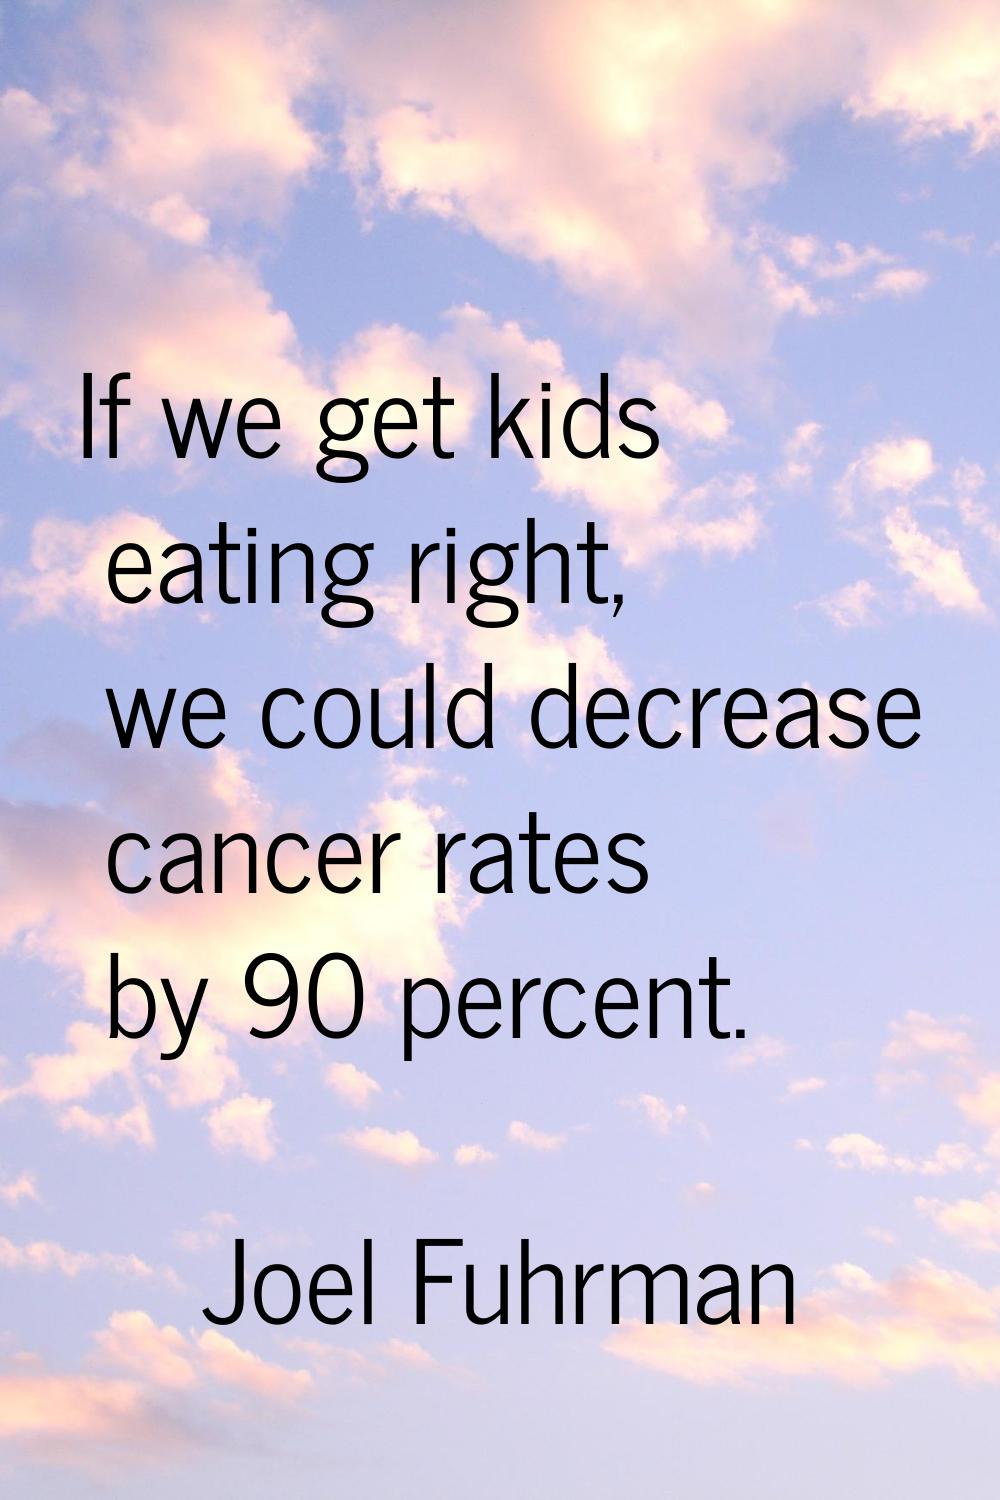 If we get kids eating right, we could decrease cancer rates by 90 percent.